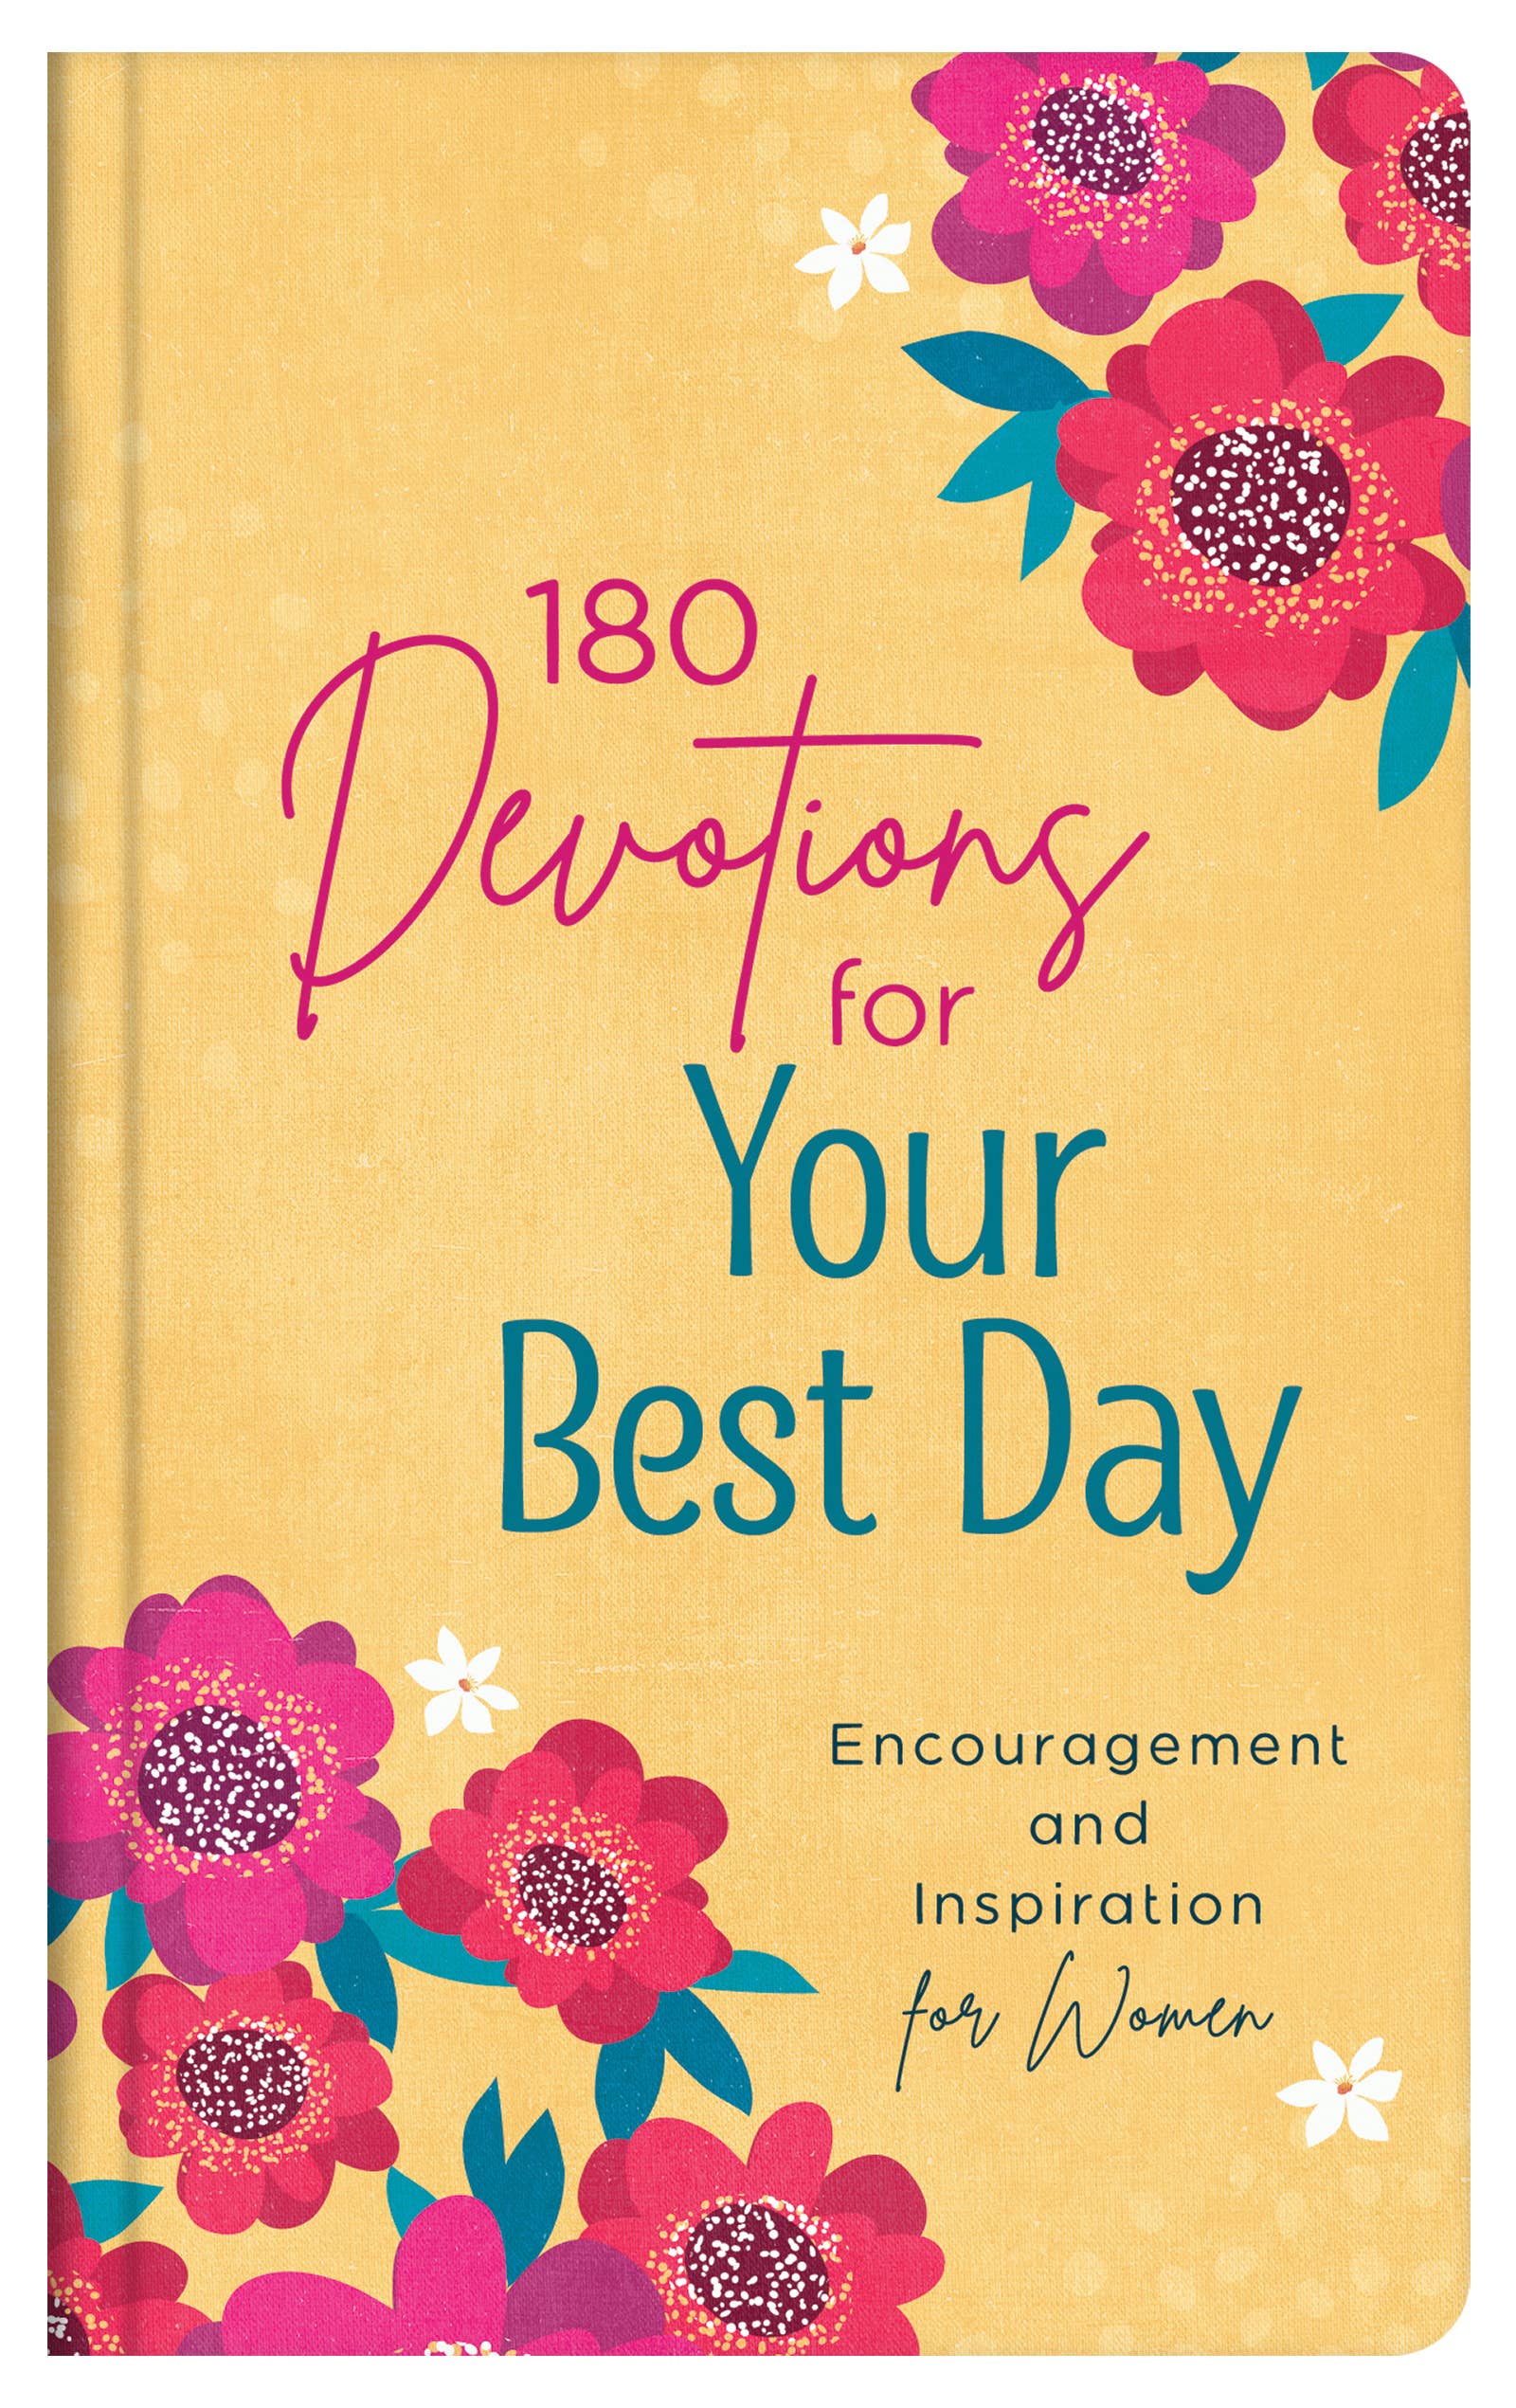 180 Devotions for Your Best Day Core Barbour Publishing, Inc.